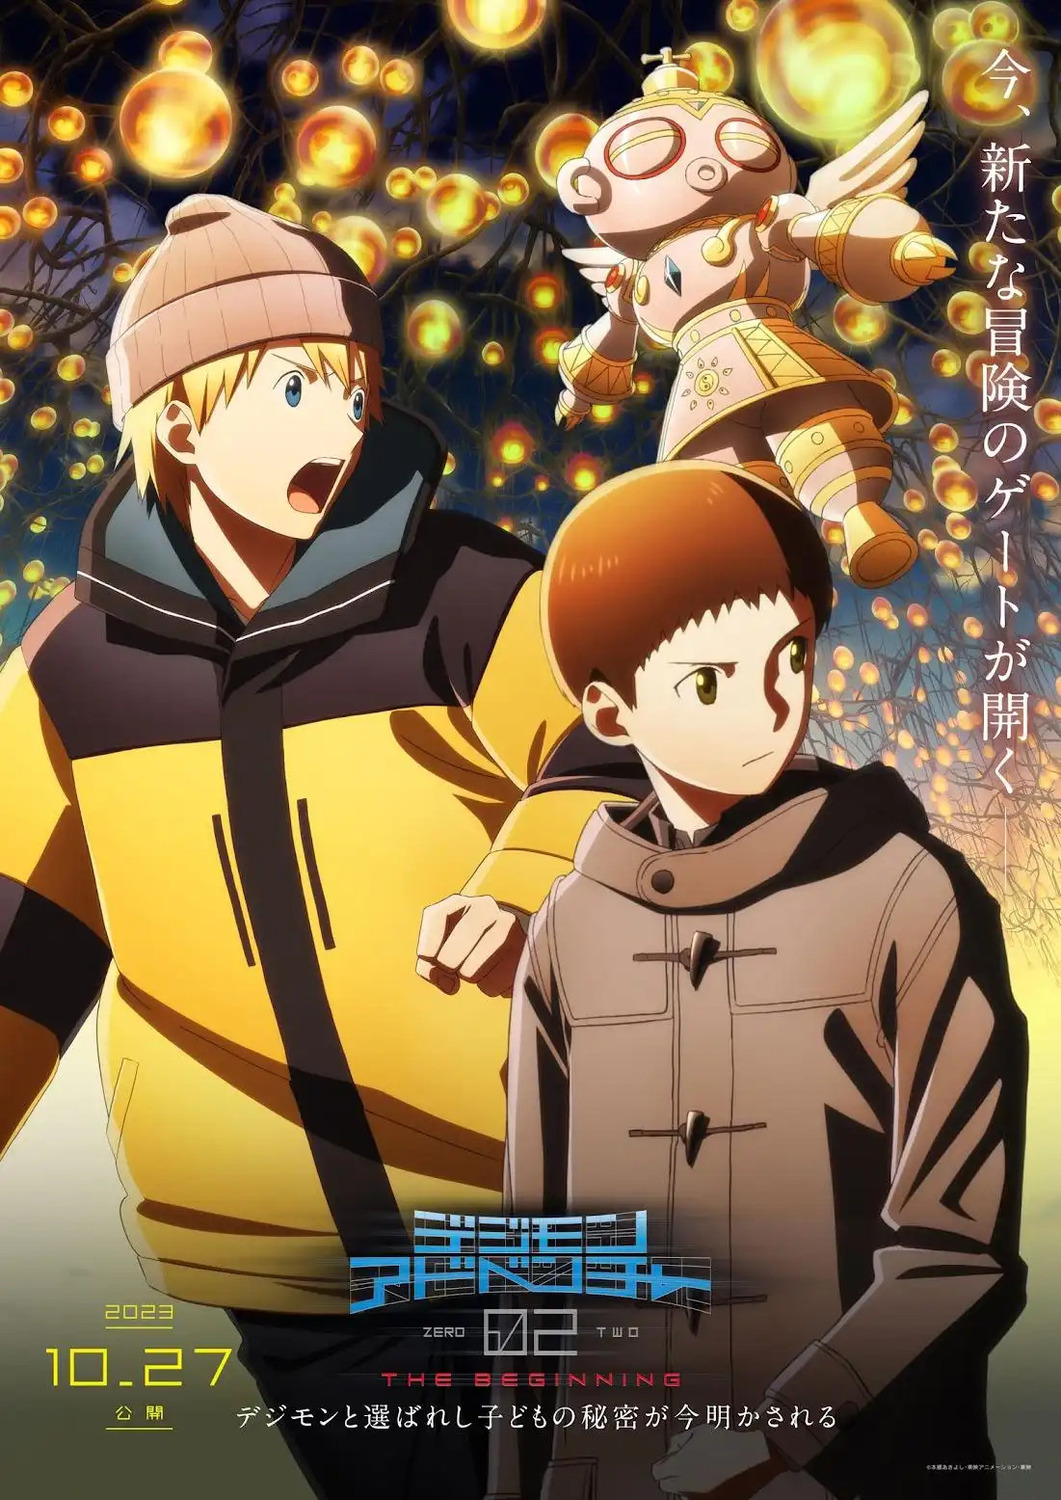 Extra Large Movie Poster Image for Digimon Adventure 02: The Beginning (#5 of 6)